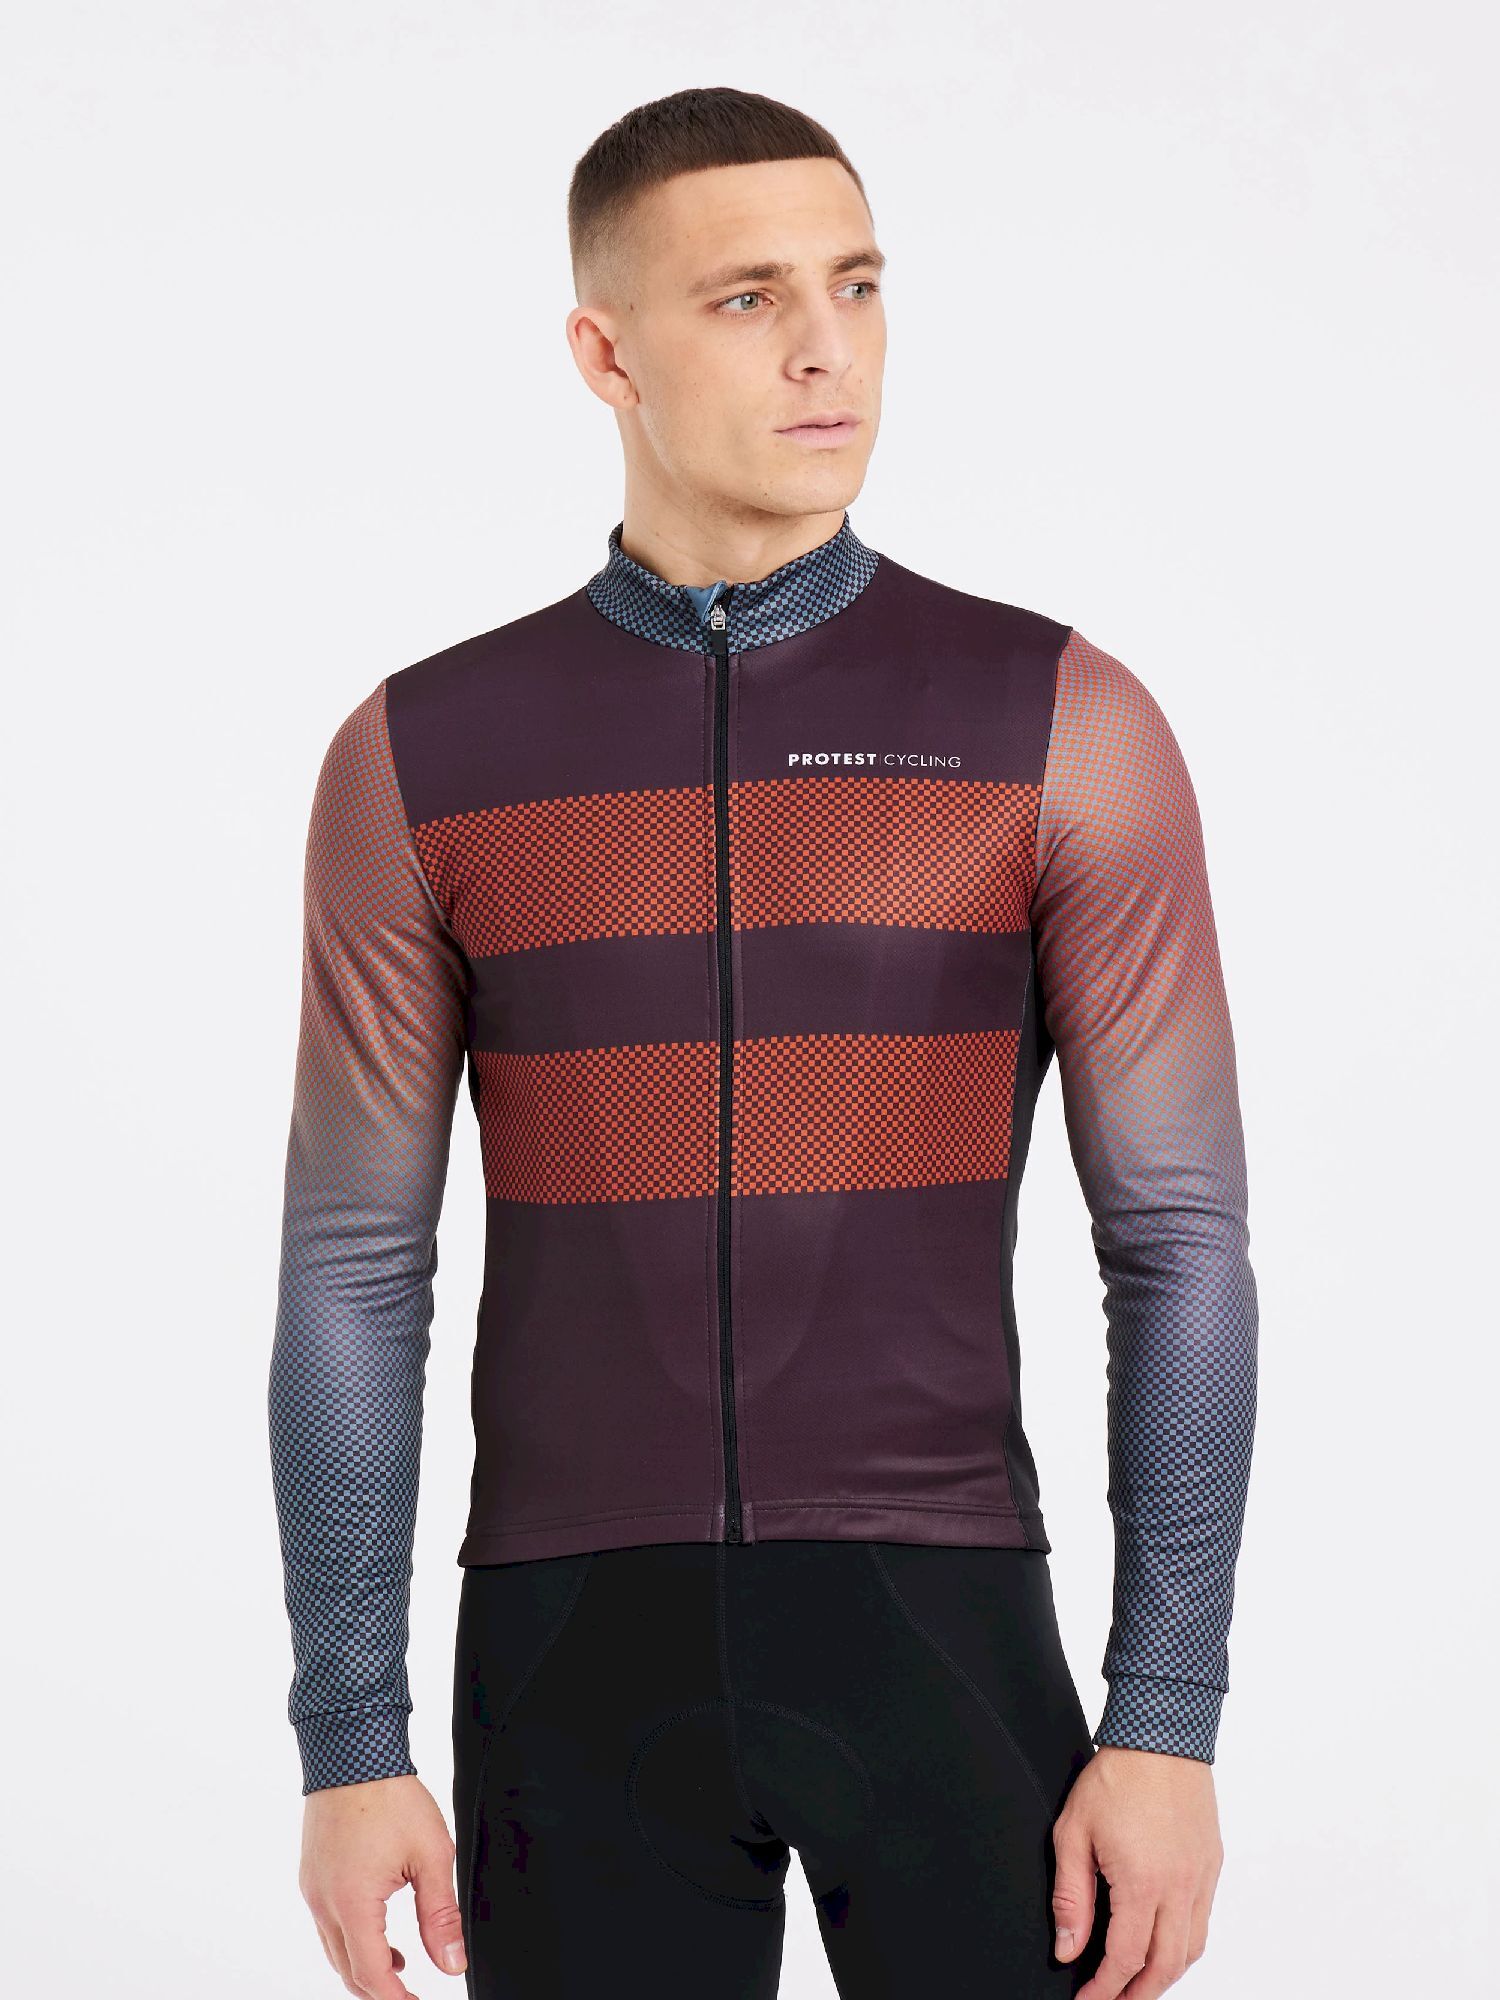 Protest Prtdunder - Cycling jersey - Men's | Hardloop